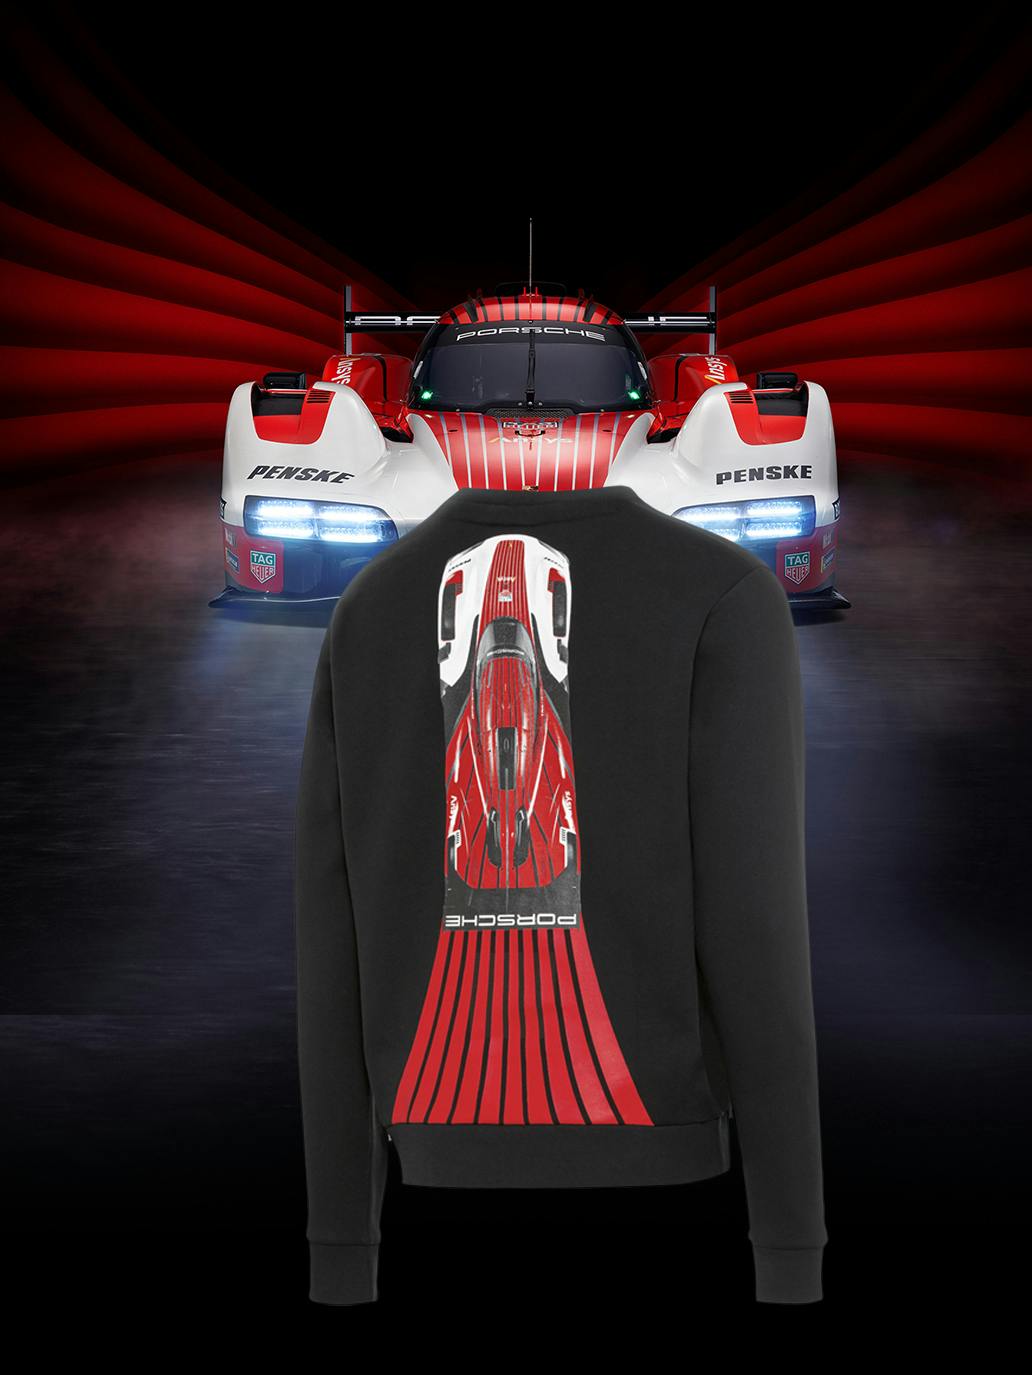 You can see a black sweater with a red racing car. In the background there is also a red race car.